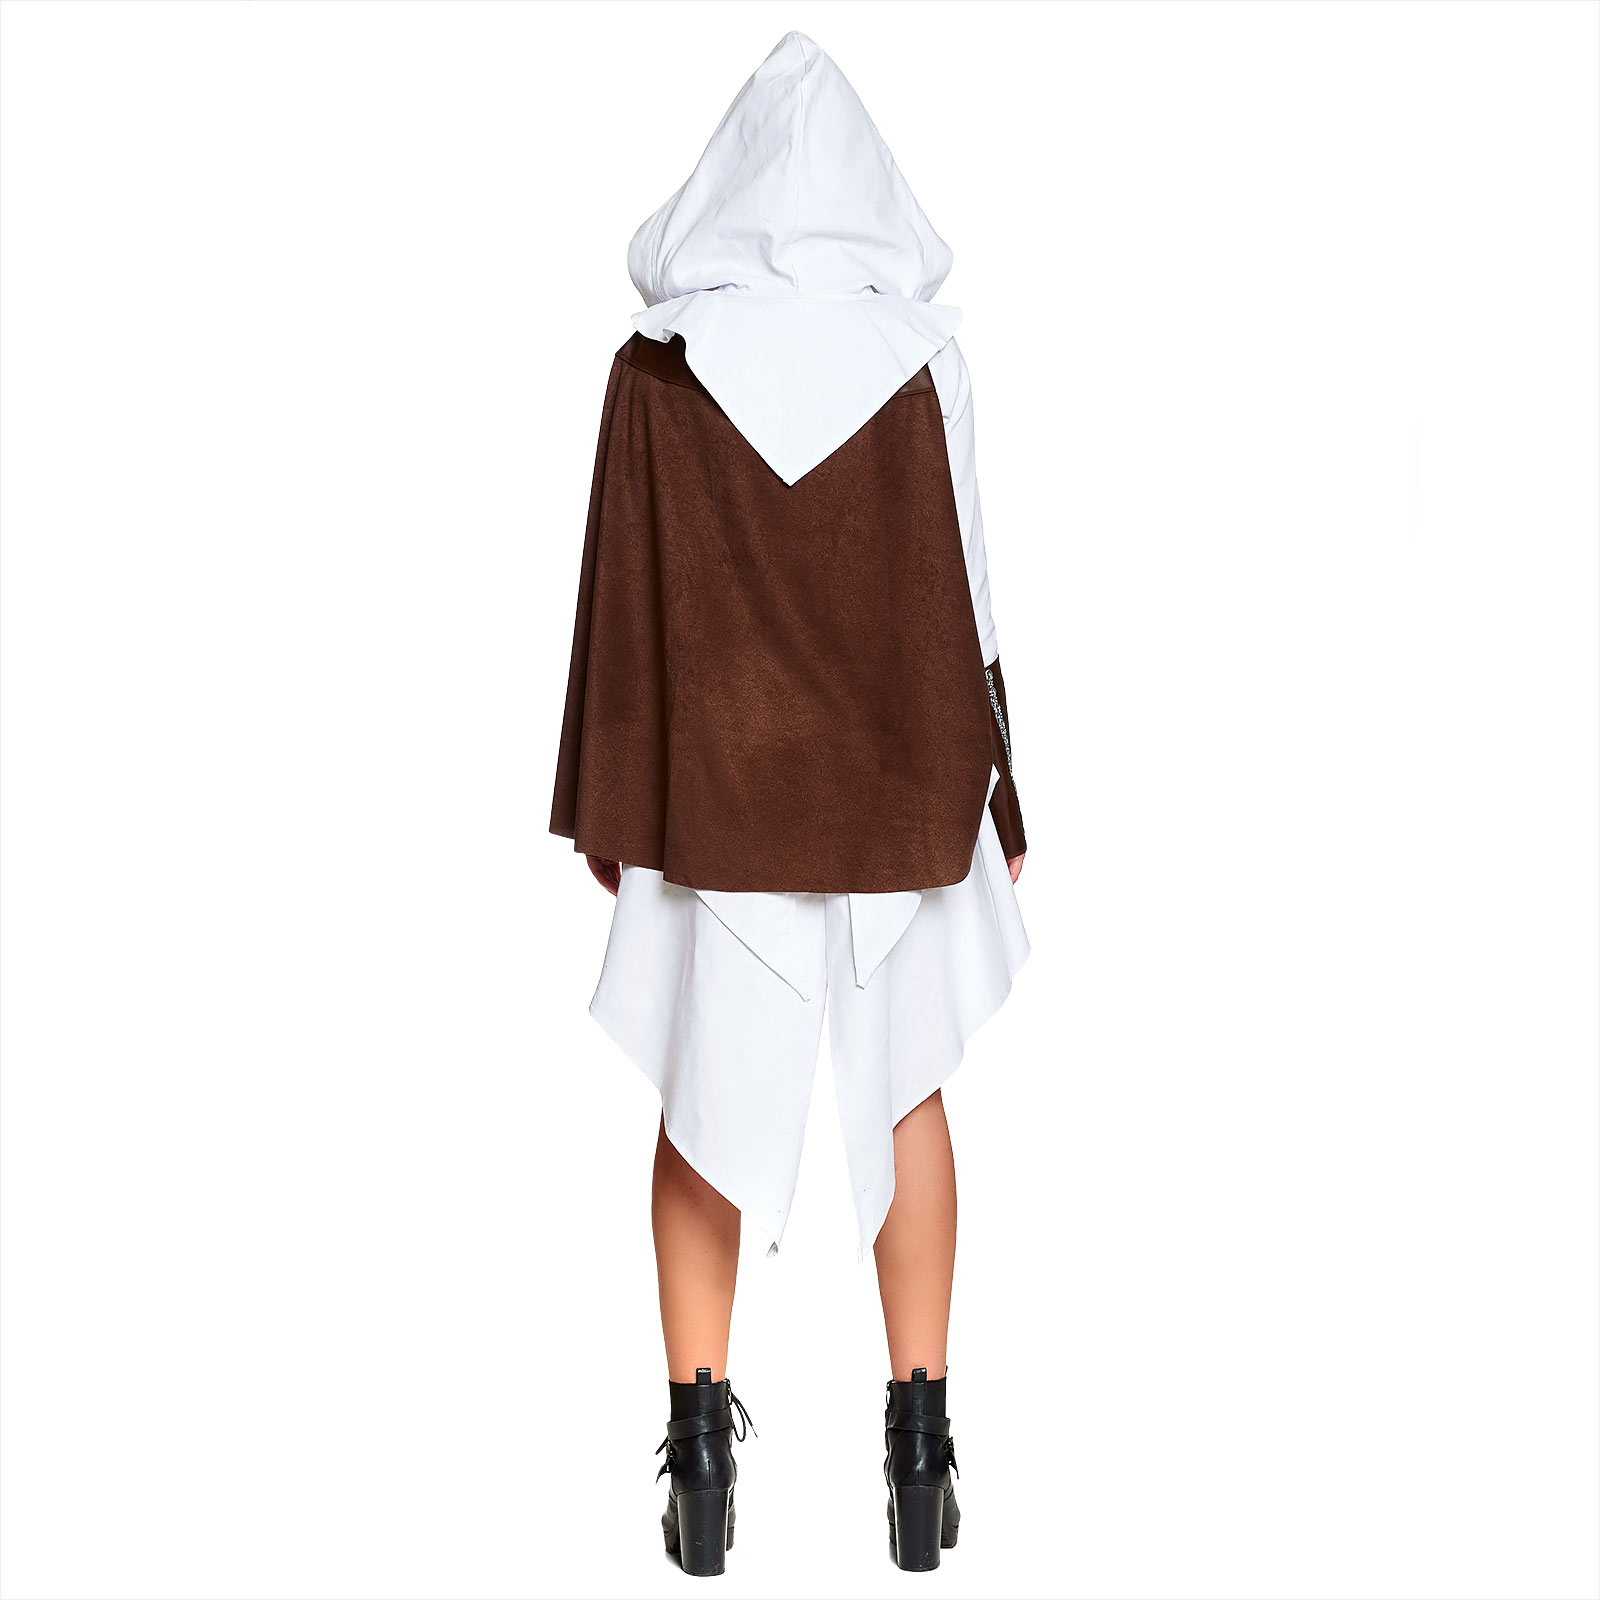 Assassin's Costume for Women for Assassin's Creed Fans